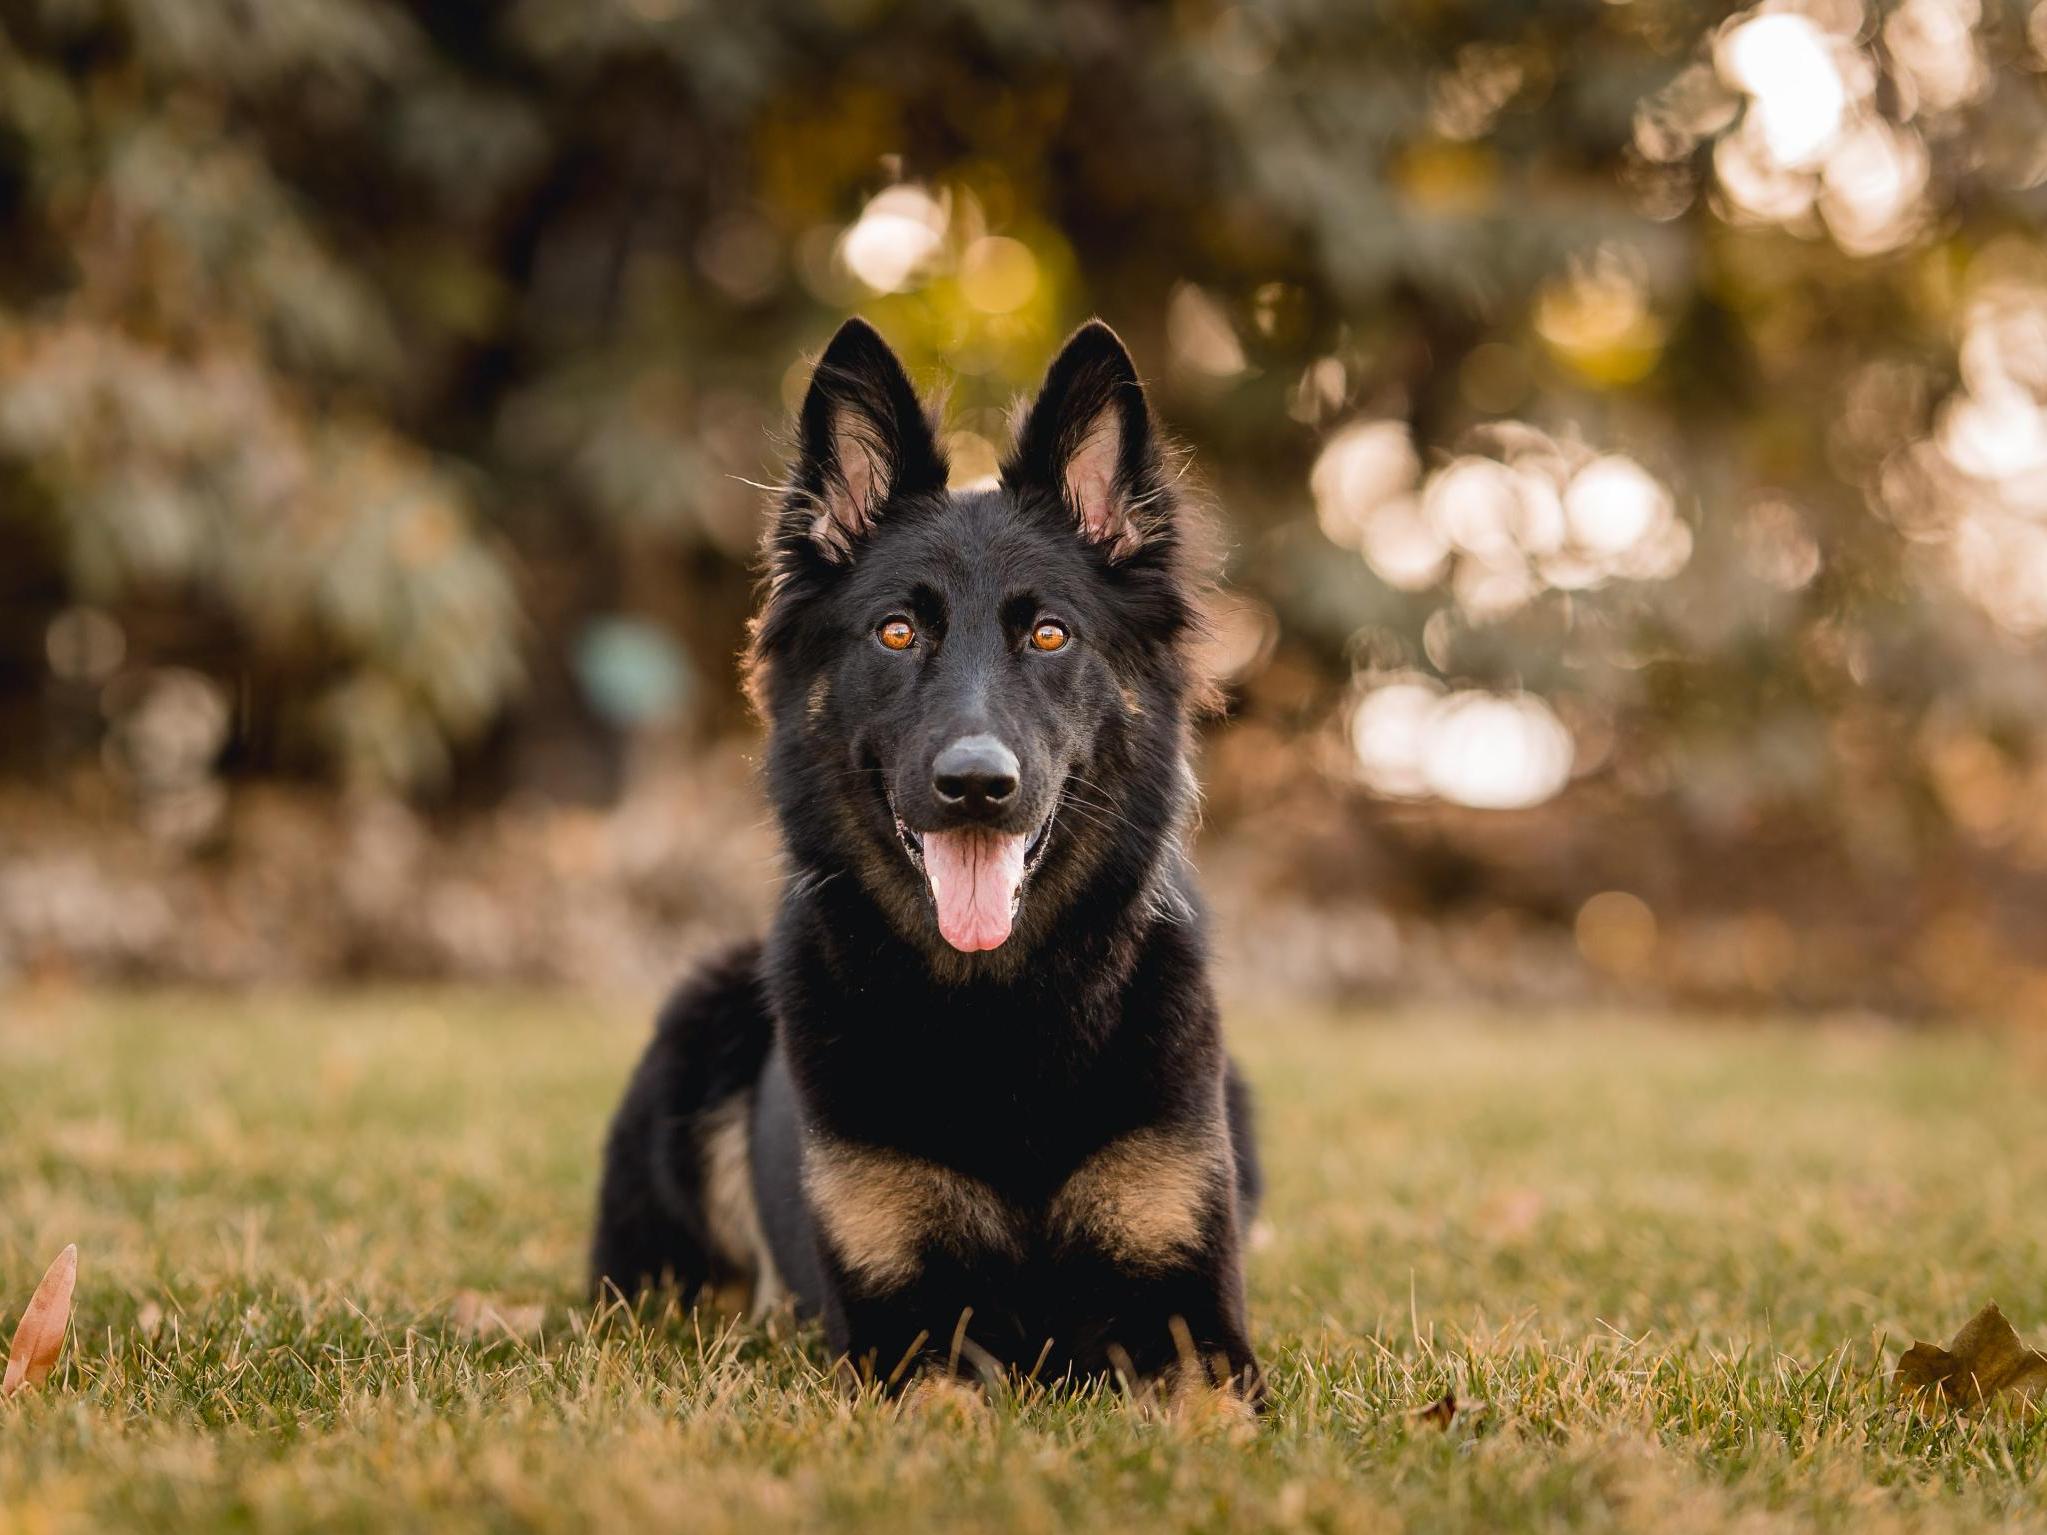 Protection Dogs For Sale | Protection Dog Sales